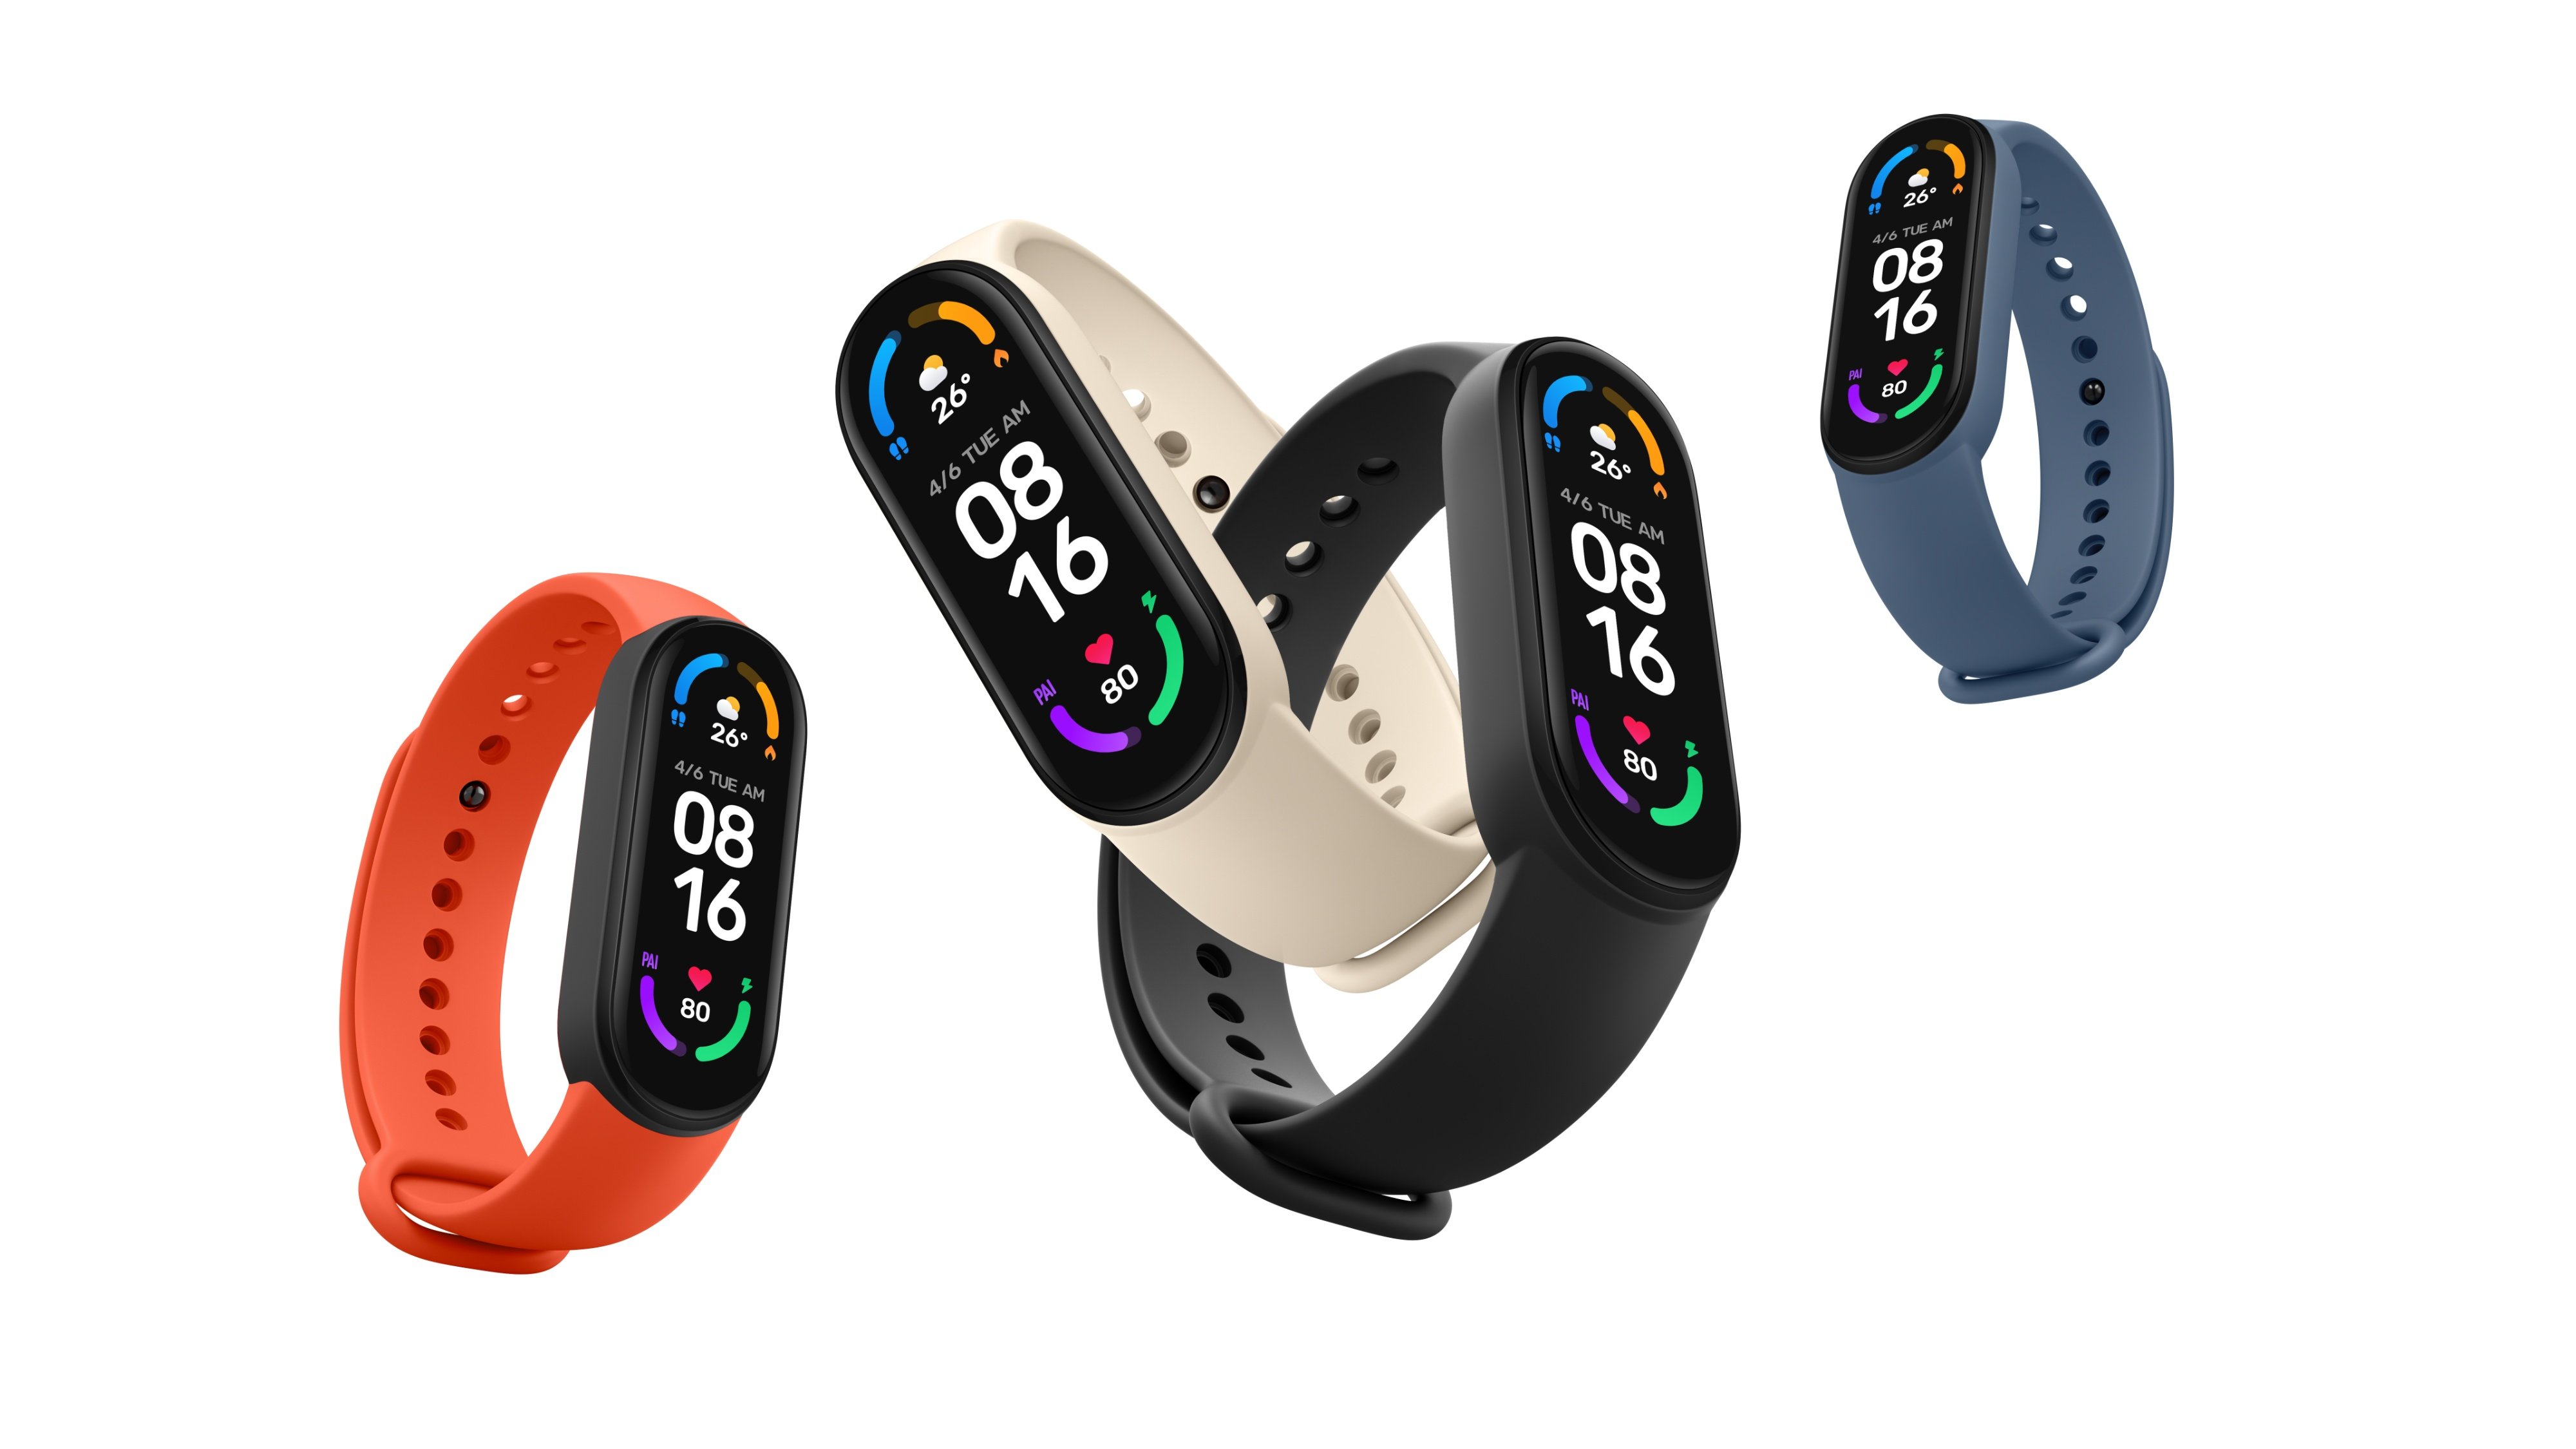 Does the Redmi Smart Band Pro connect to the Zepp App?(I have